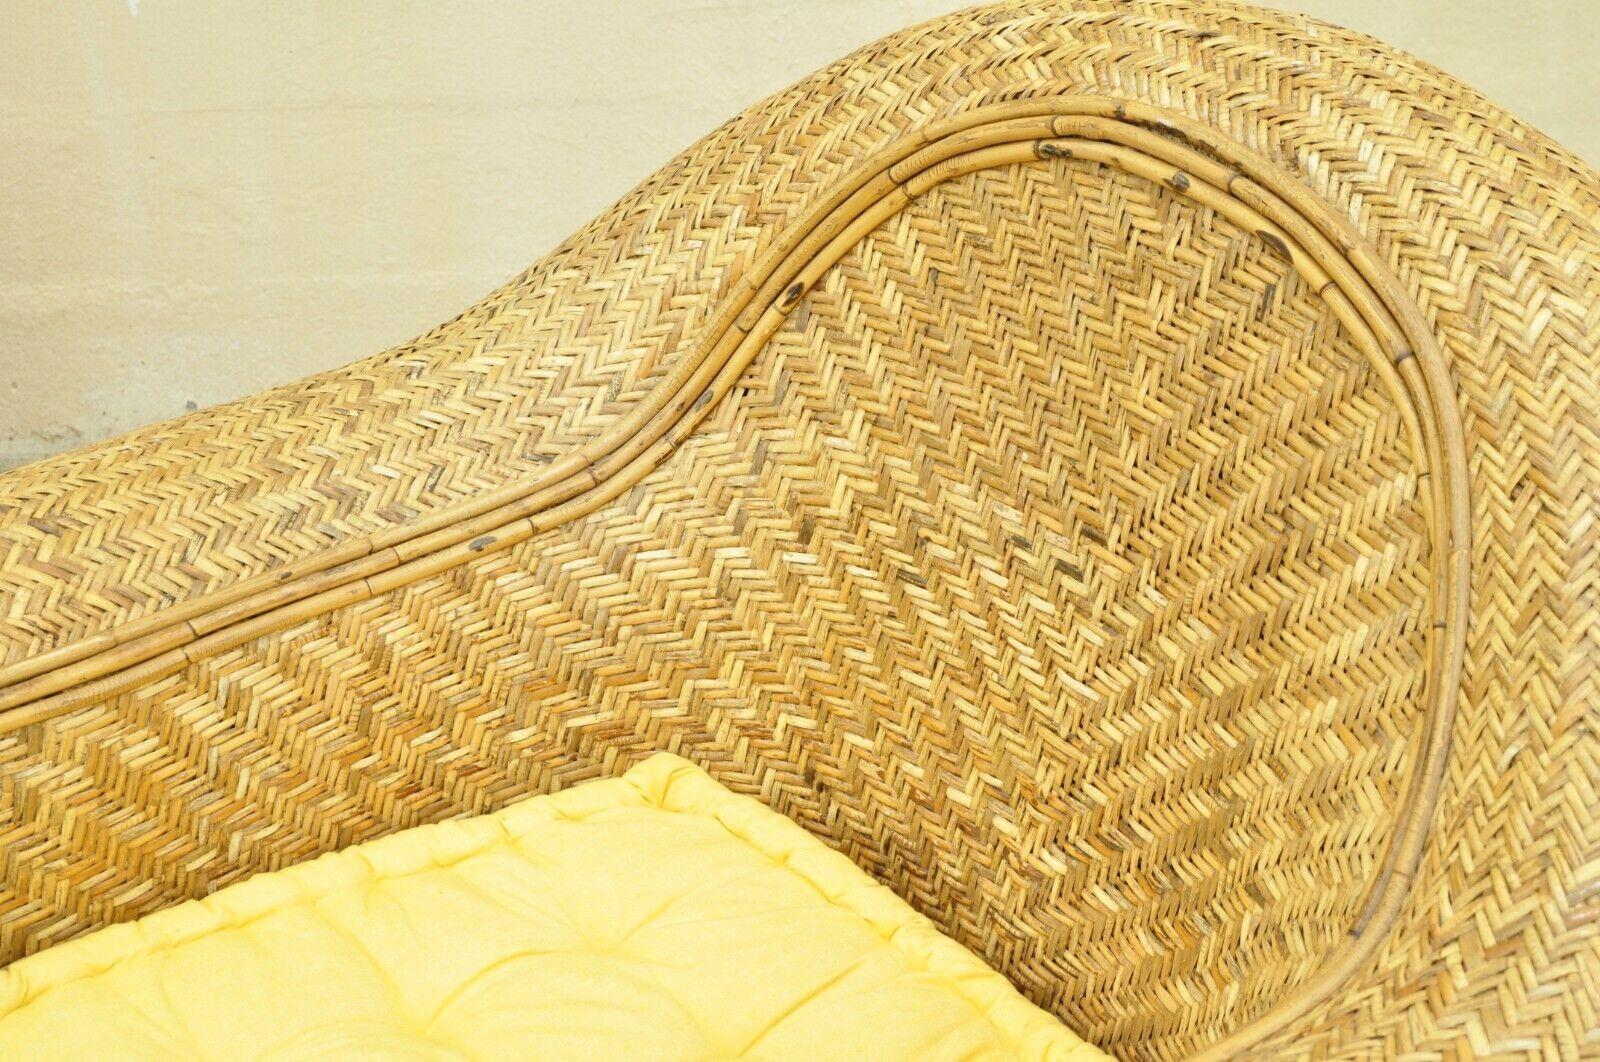 Ralph Lauren Attr. Large Woven Wicker Rattan Club Lounge Chairs - a Pair For Sale 6